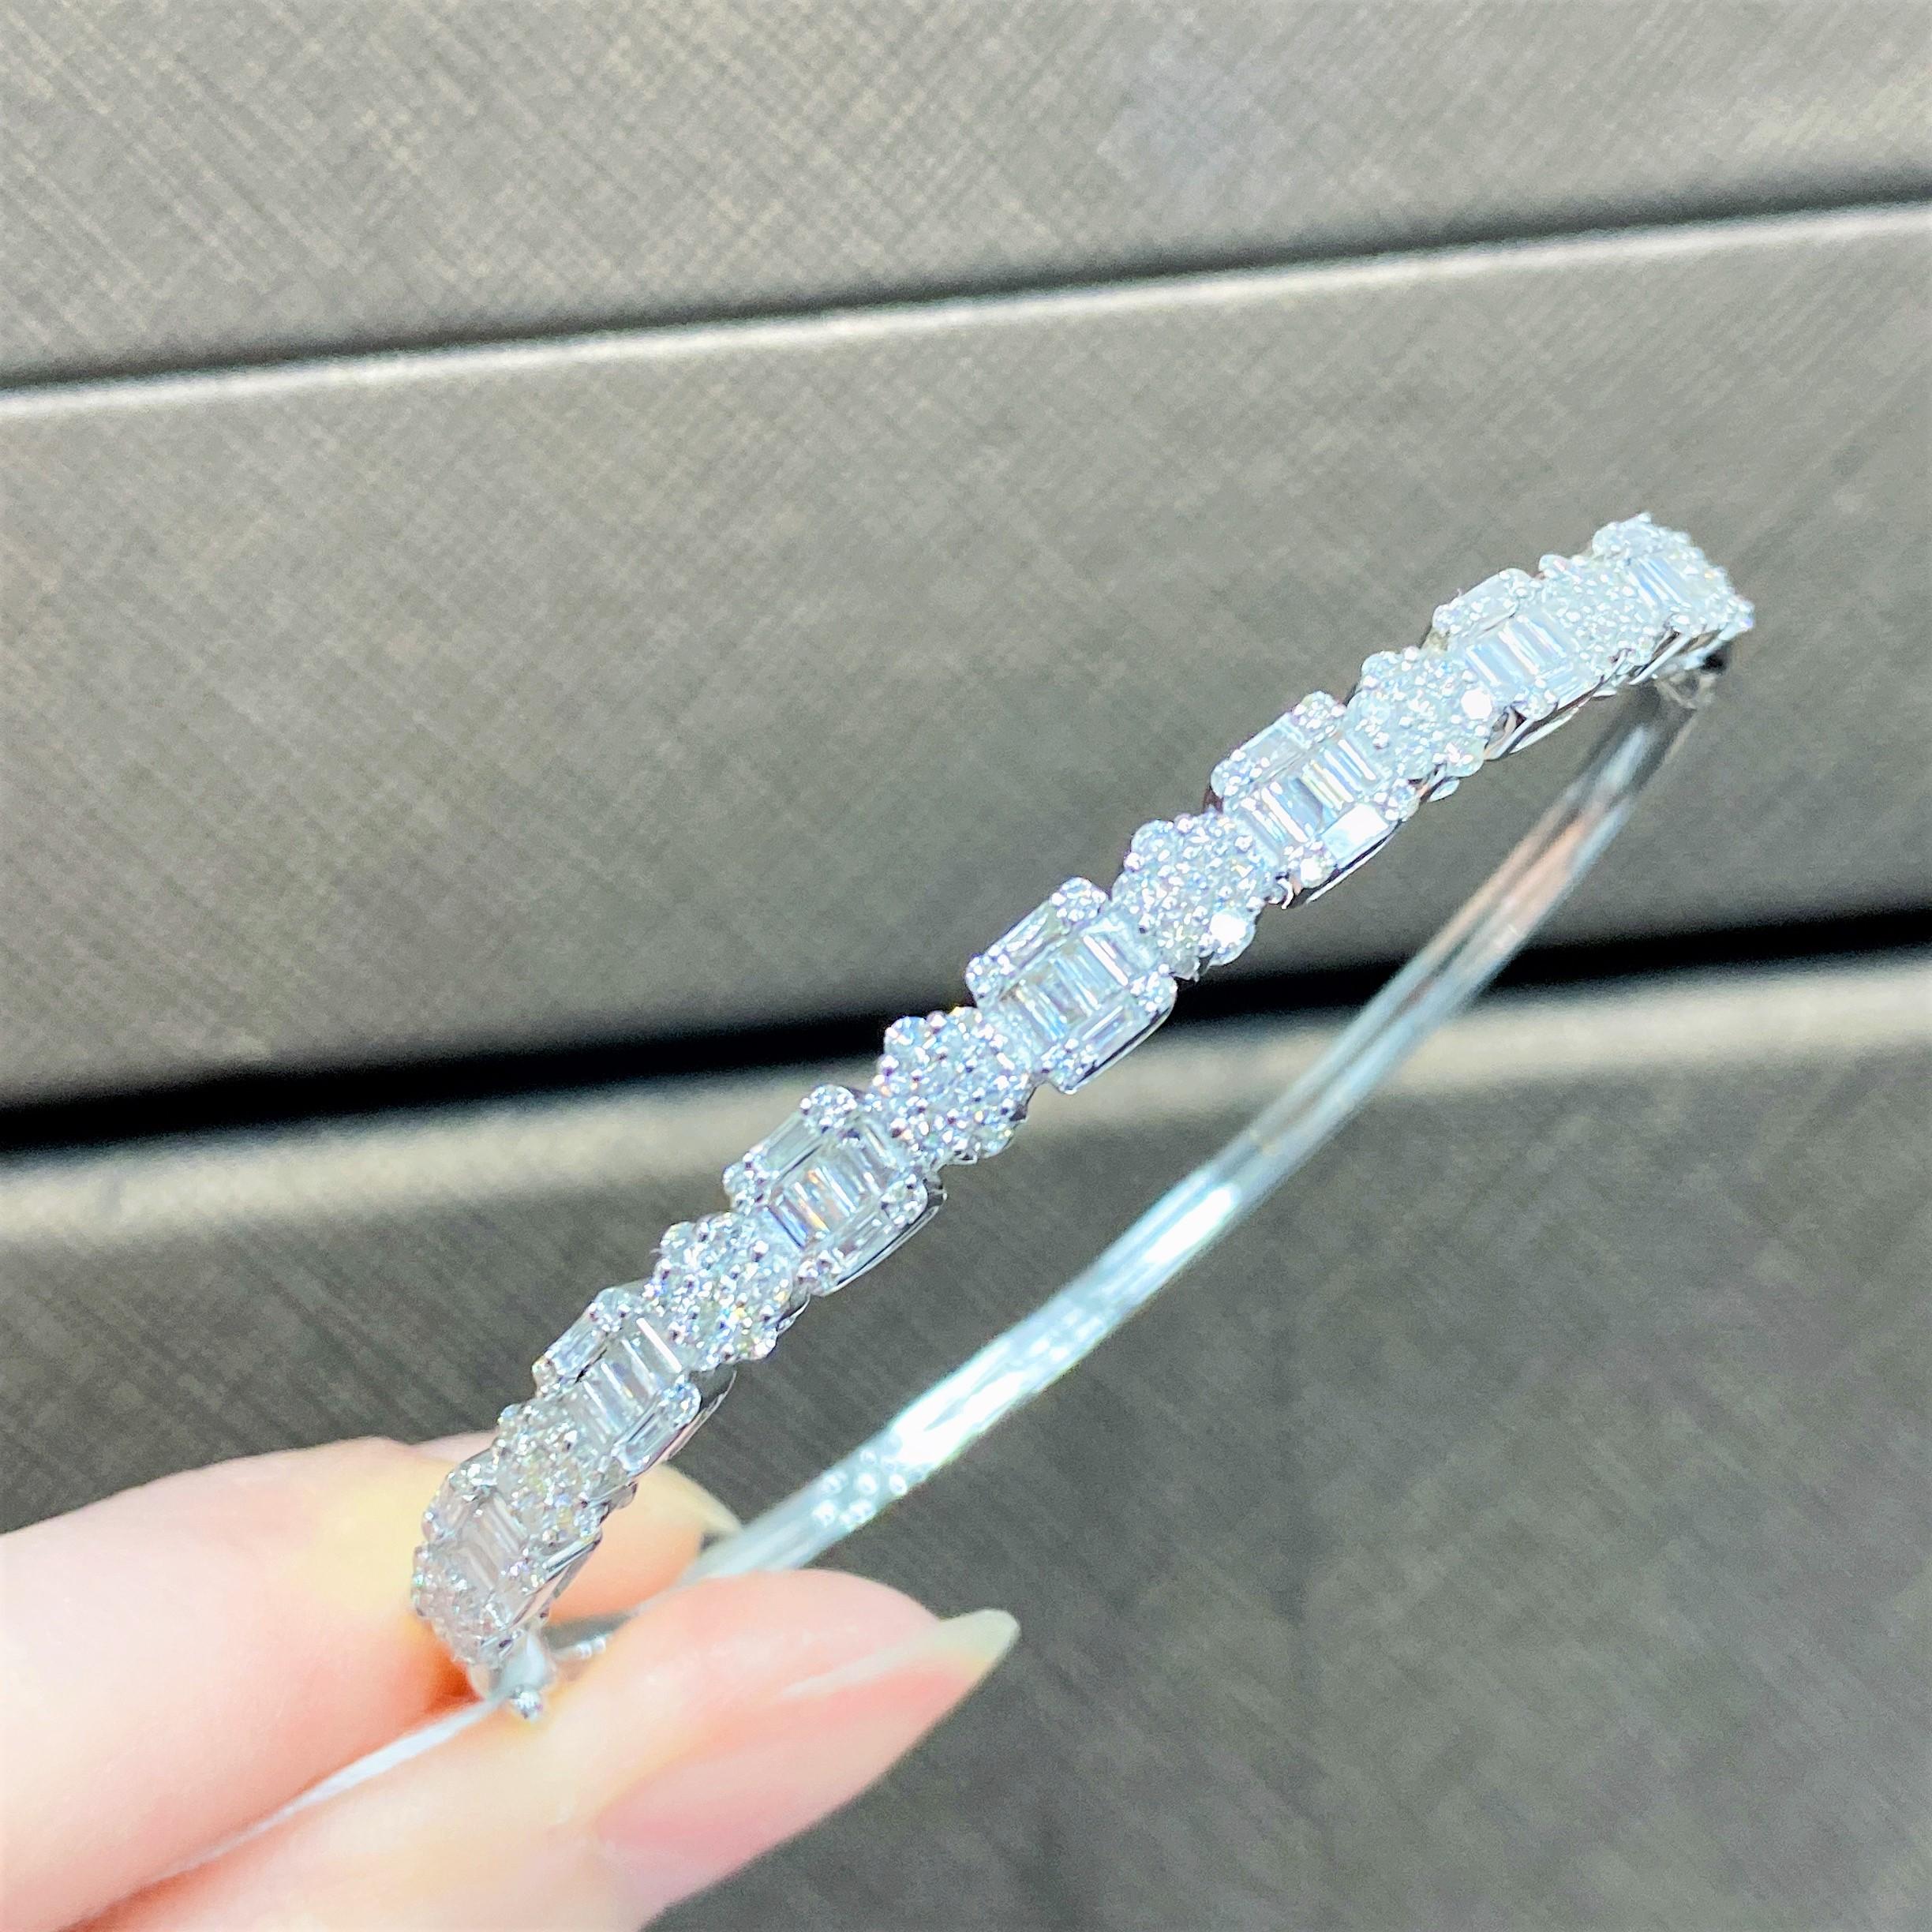 The Following Item we are offering is this Beautiful Rare Important 18KT White Gold Glittering Diamond Bangle Bracelet. Bracelet is comprised with Approx 1.50CTS of Magnificent Rare Gorgeous Fancy Trillion Baguette Cut Diamonds with Round Glittering